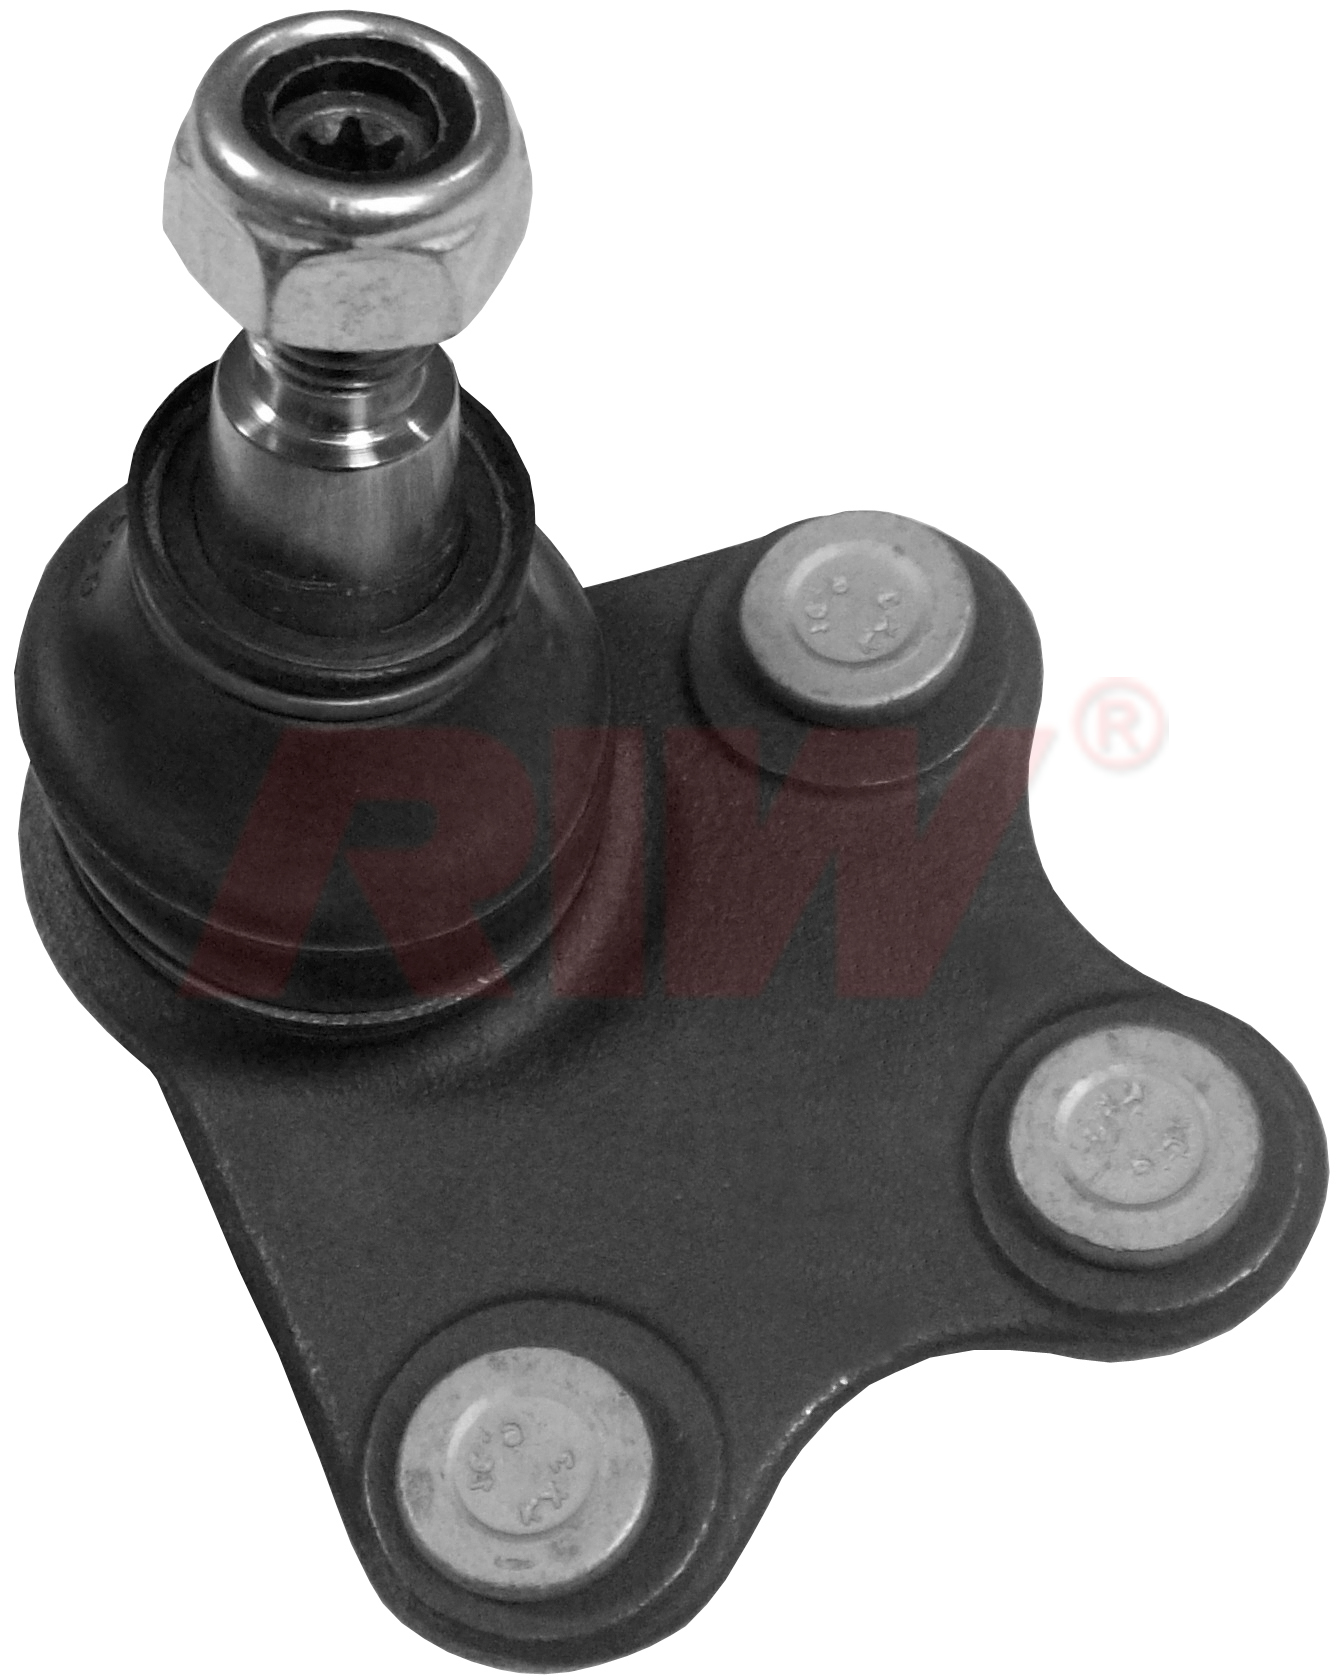 VOLKSWAGEN POLO (MEXICO) 2013 - 2015 Ball Joint